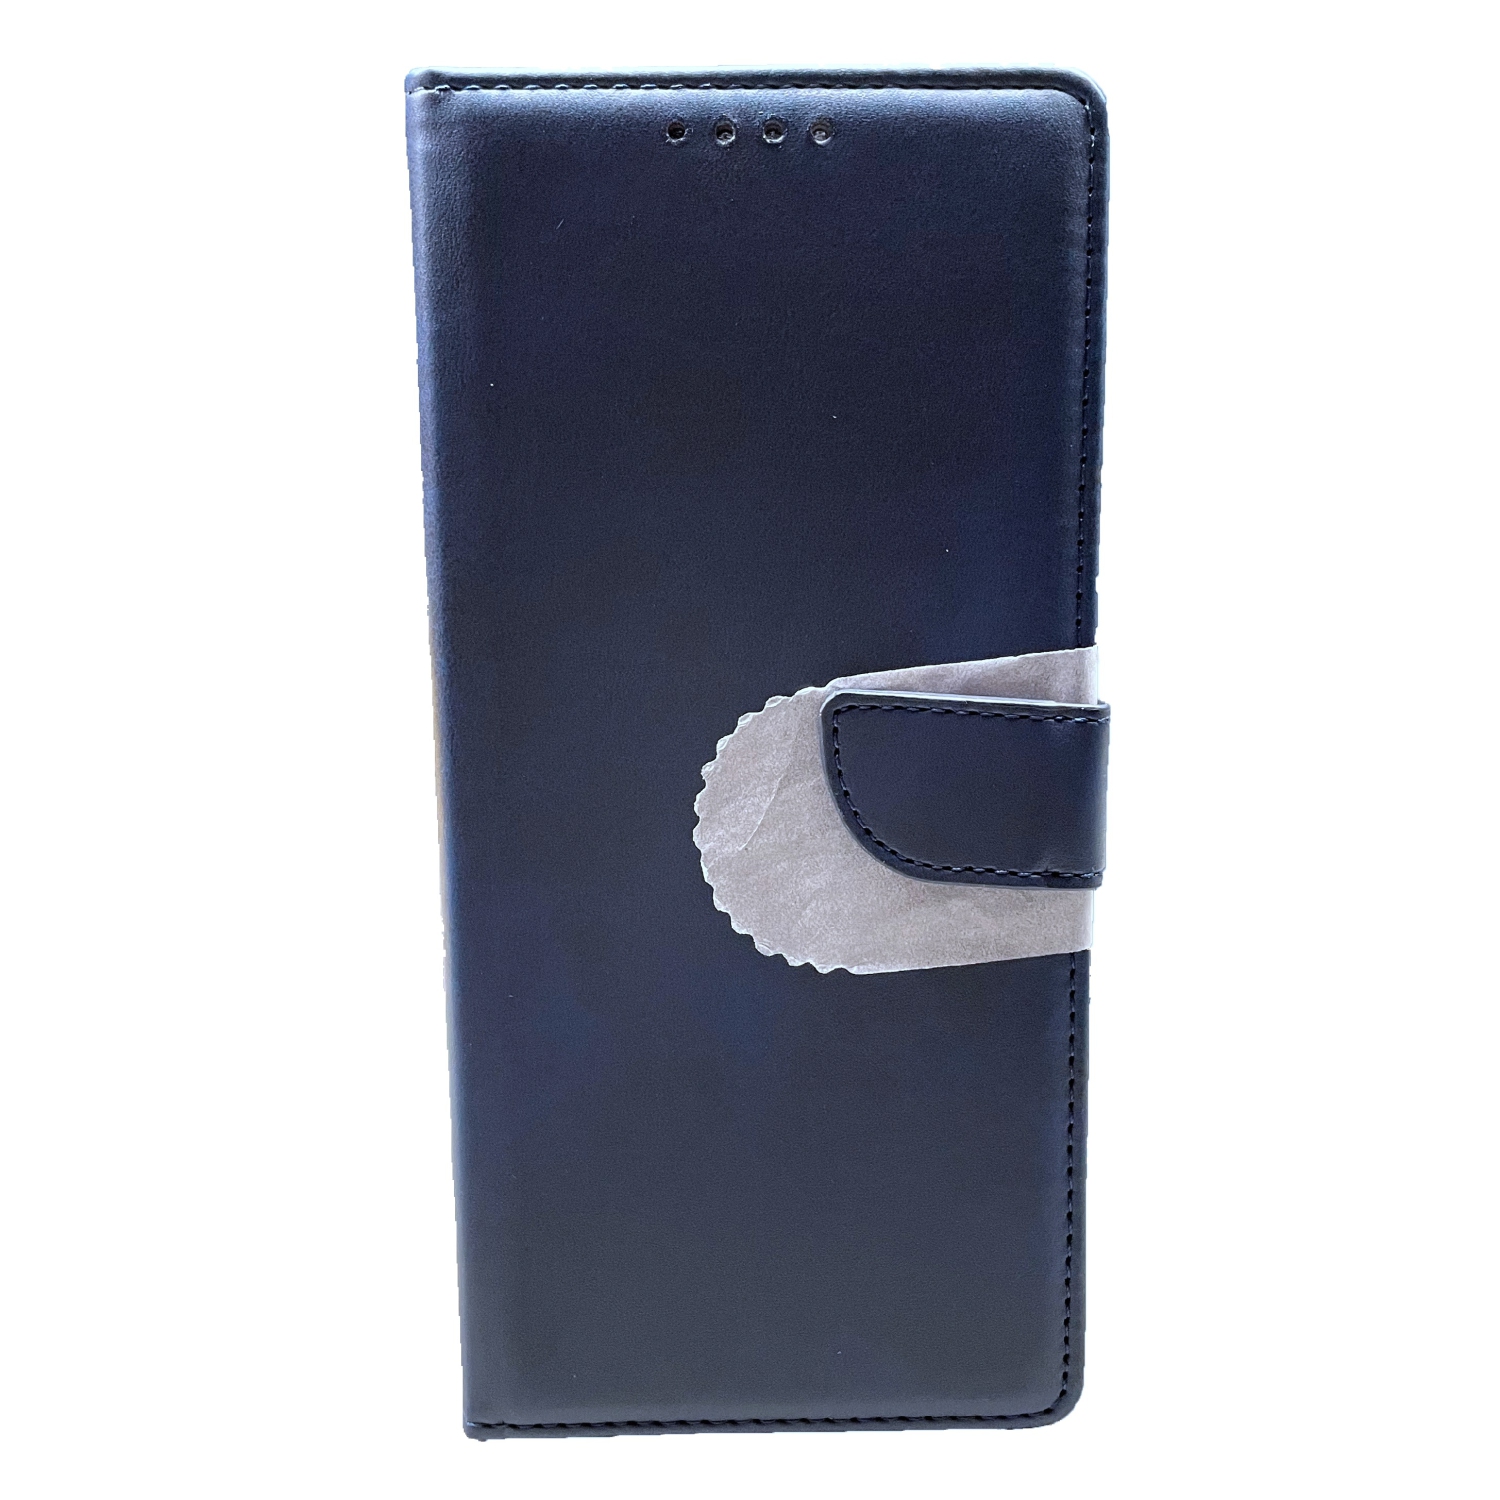 TopSave Leather Folio Flip Wallet w/Magnetic Clip Card Slot Holder Case For Motorola Moto G Play(21), Navy Blue